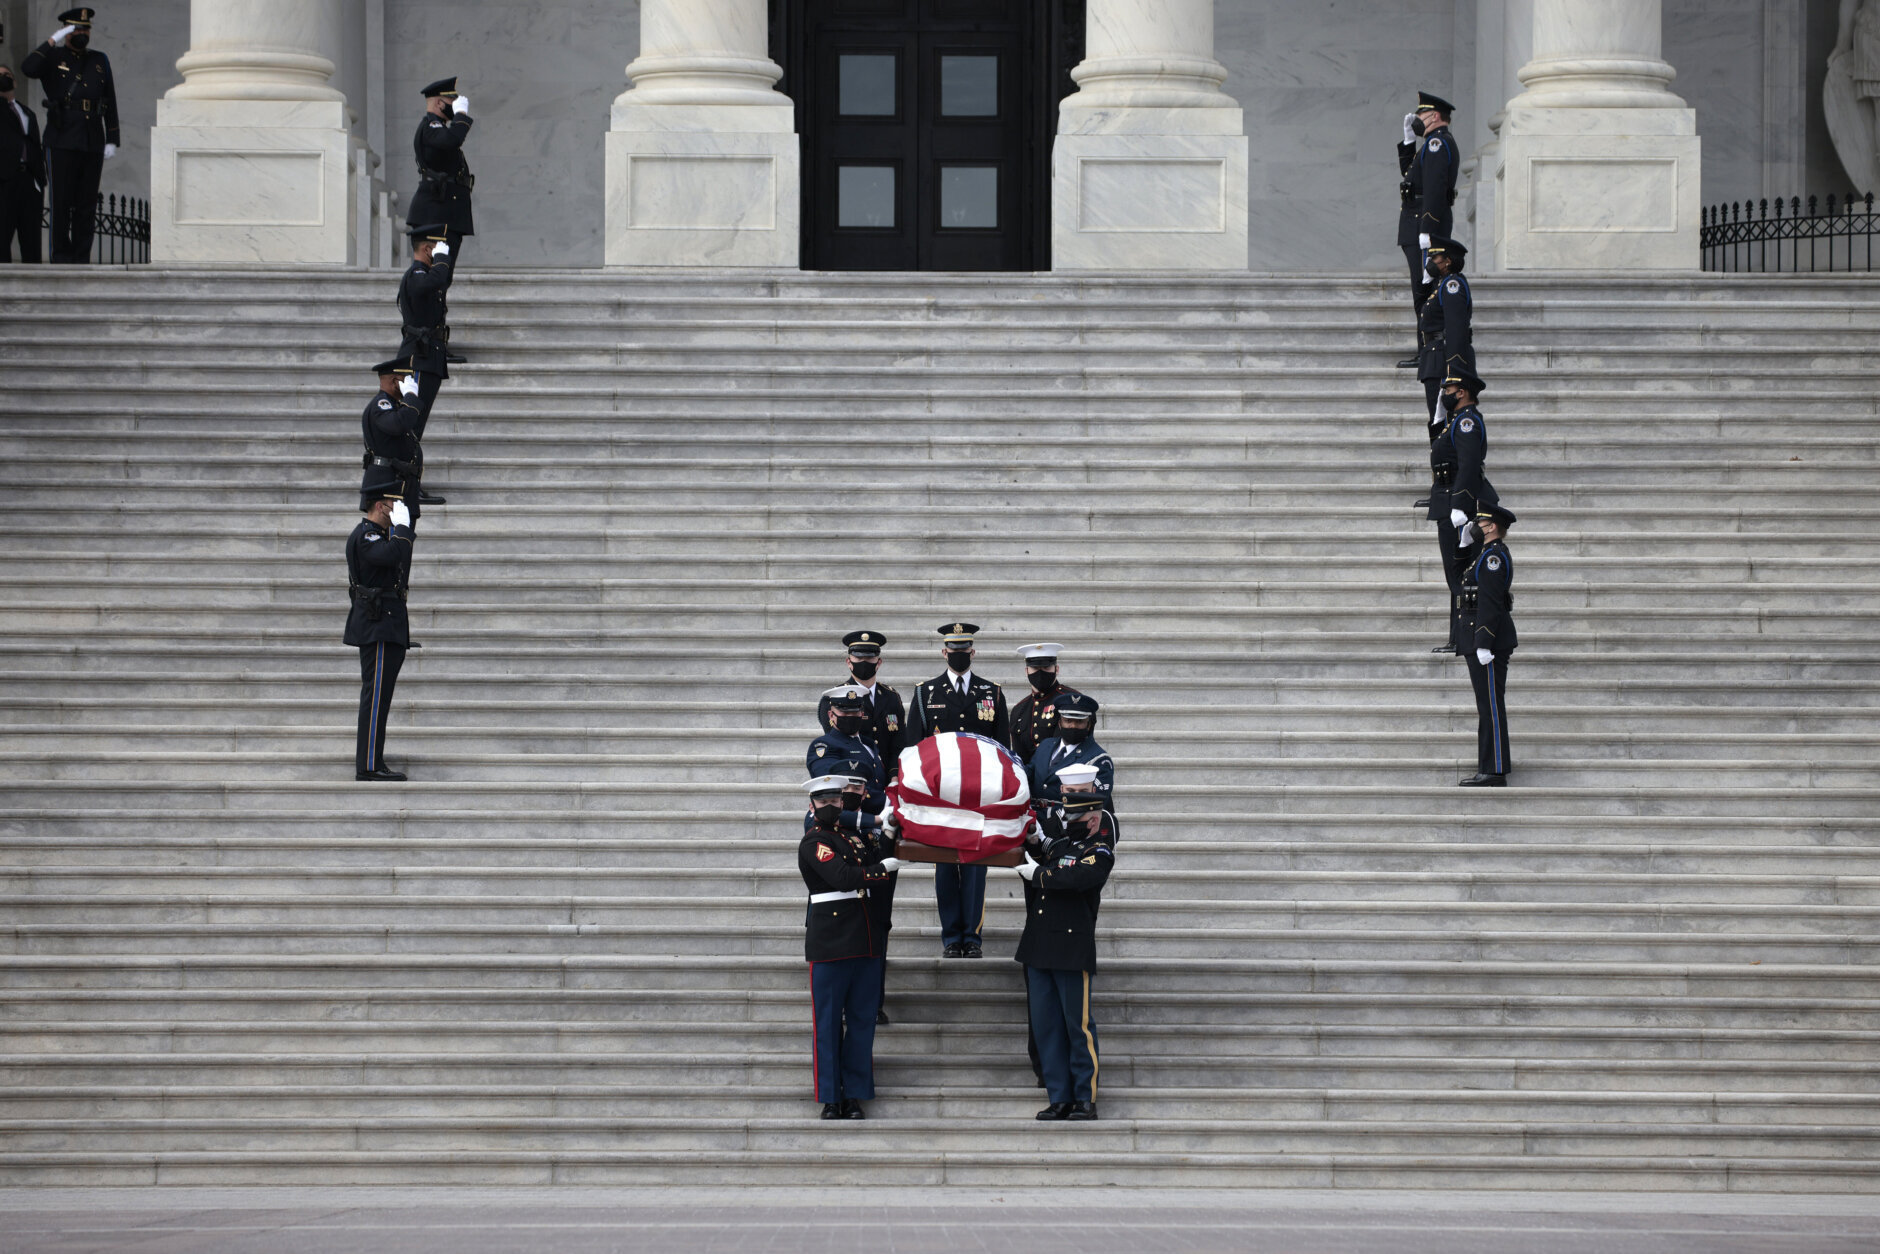 A military honor guard carries the flag-draped casket of former Sen. Bob Dole of Kansas, from the U.S. Capitol in Washington, Friday, Dec. 10, 2021, after lying in state. (Anna Moneymaker/Pool via AP)